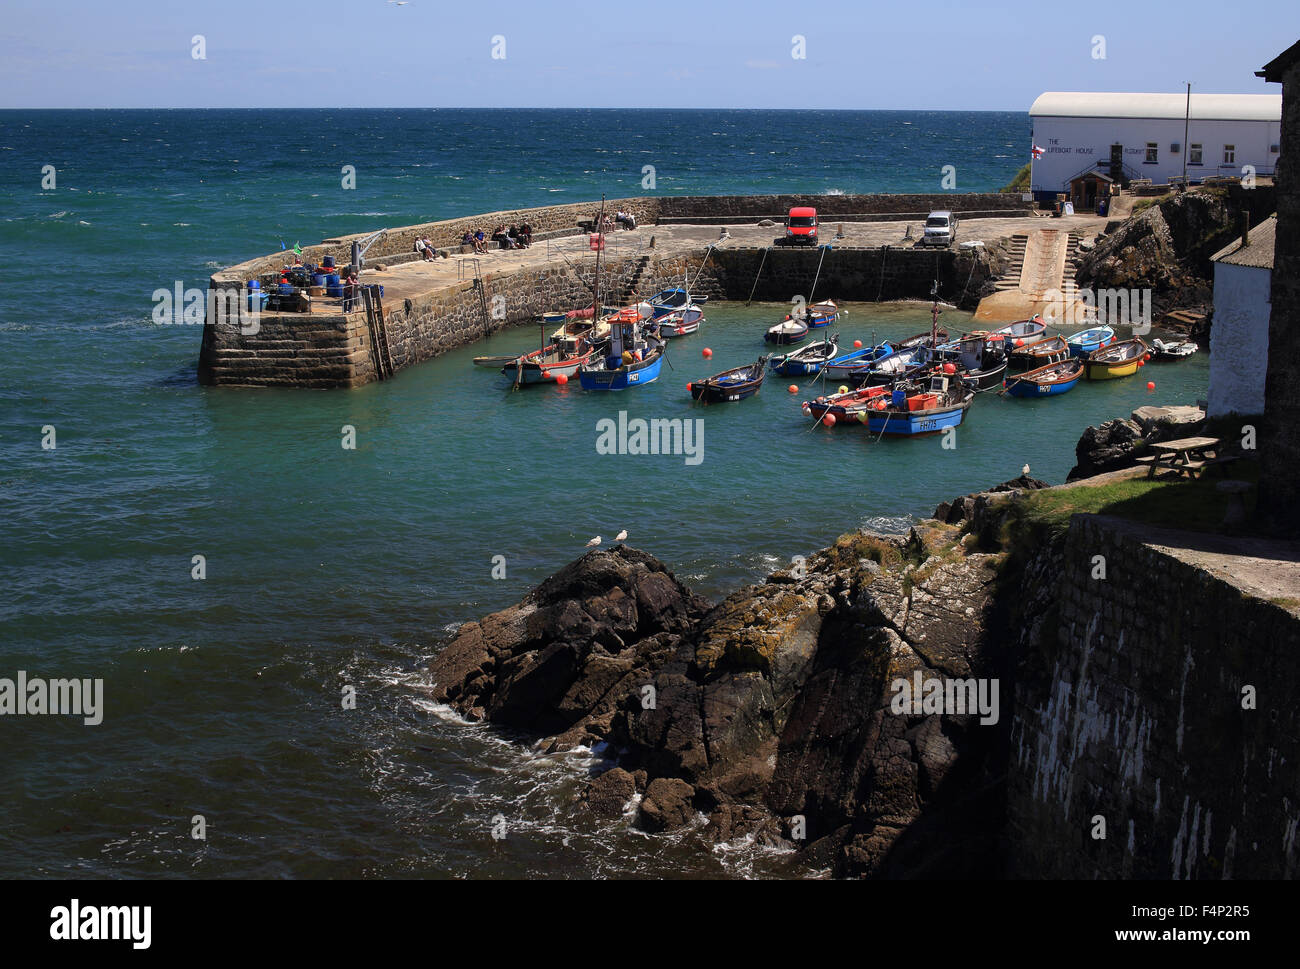 The harbour at Coverack, Cornwall, England, UK. Stock Photo